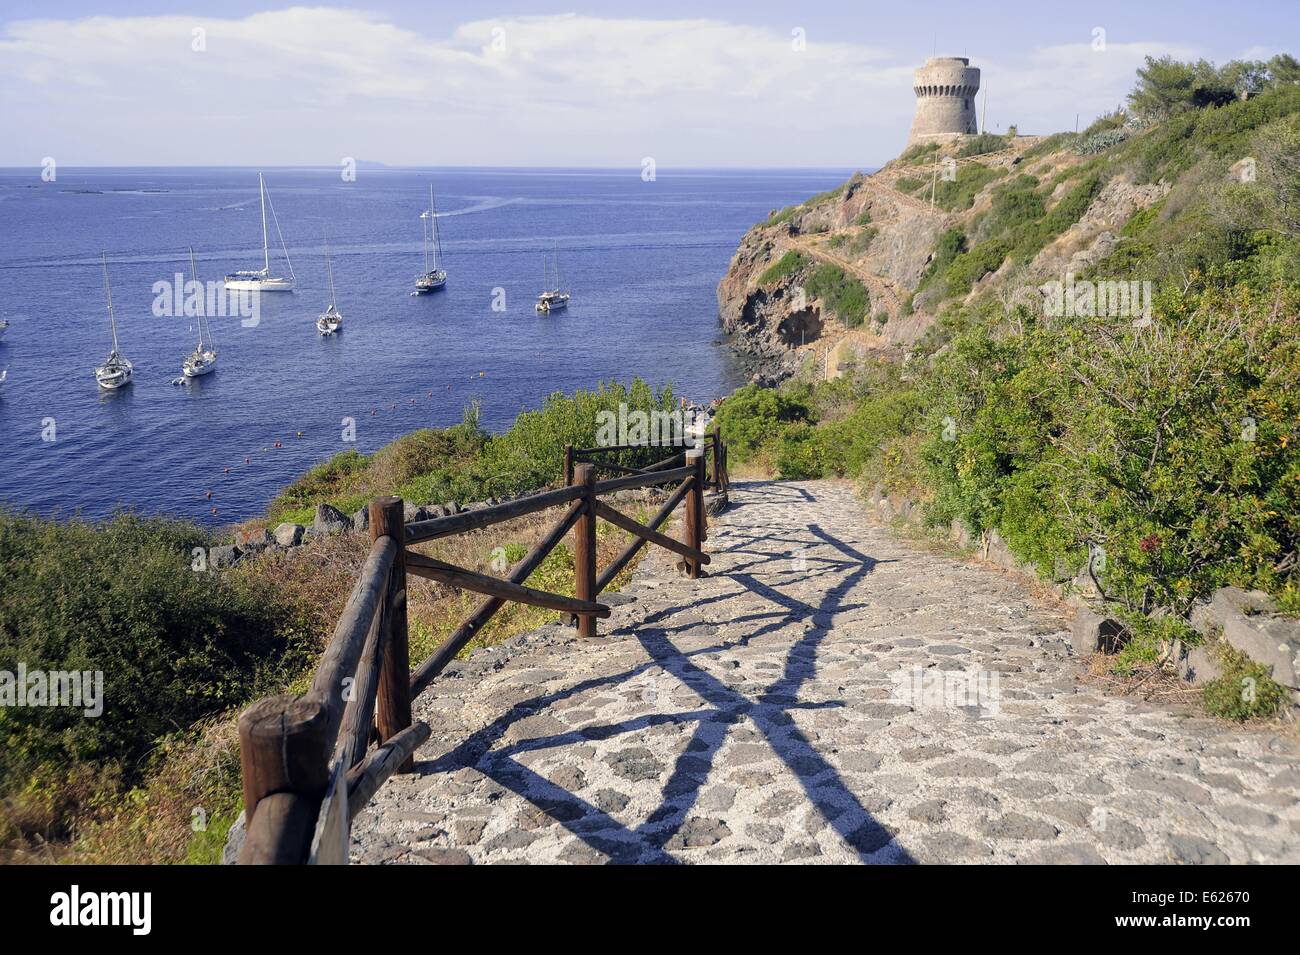 Capraia island (Tuscan Archipelago, Italy), yachts moored in the bay under the Genoese tower Stock Photo